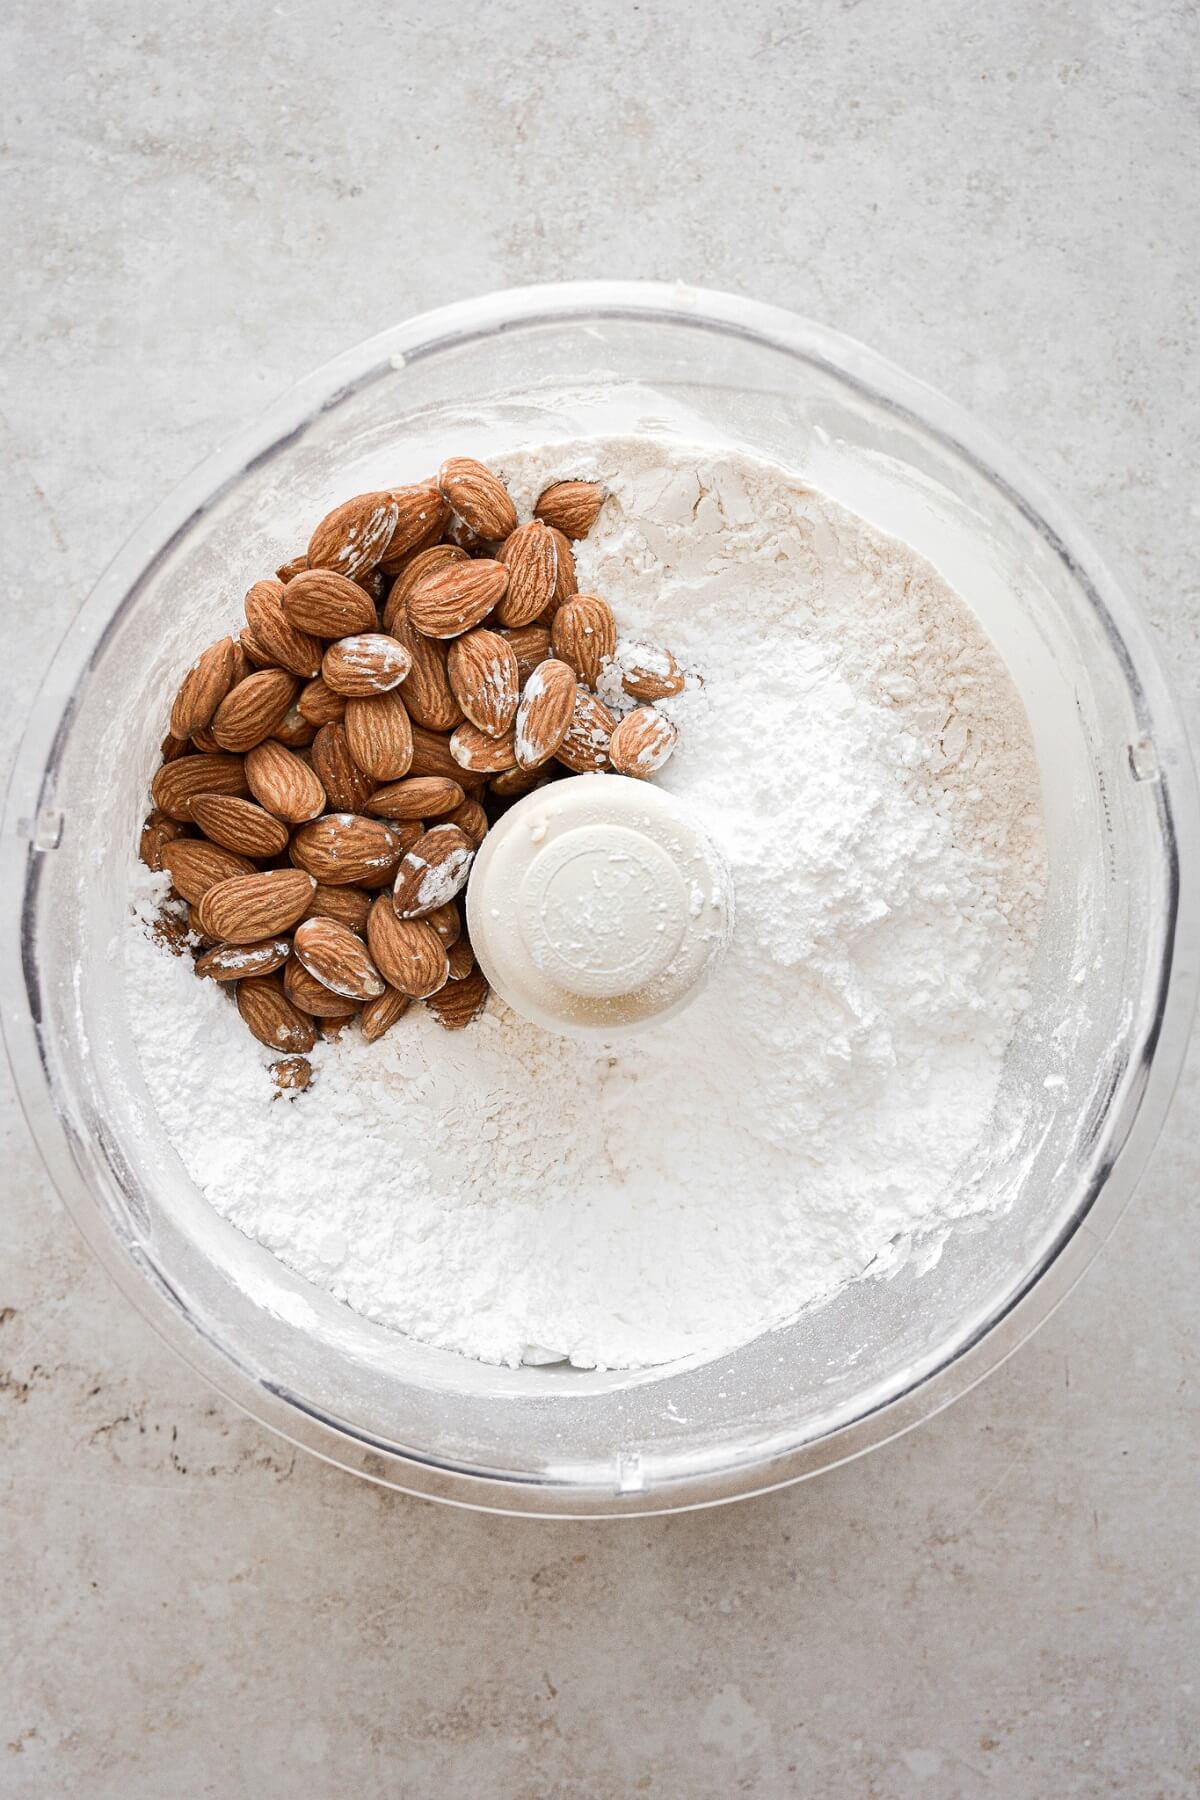 Almonds and flour in a food processor.